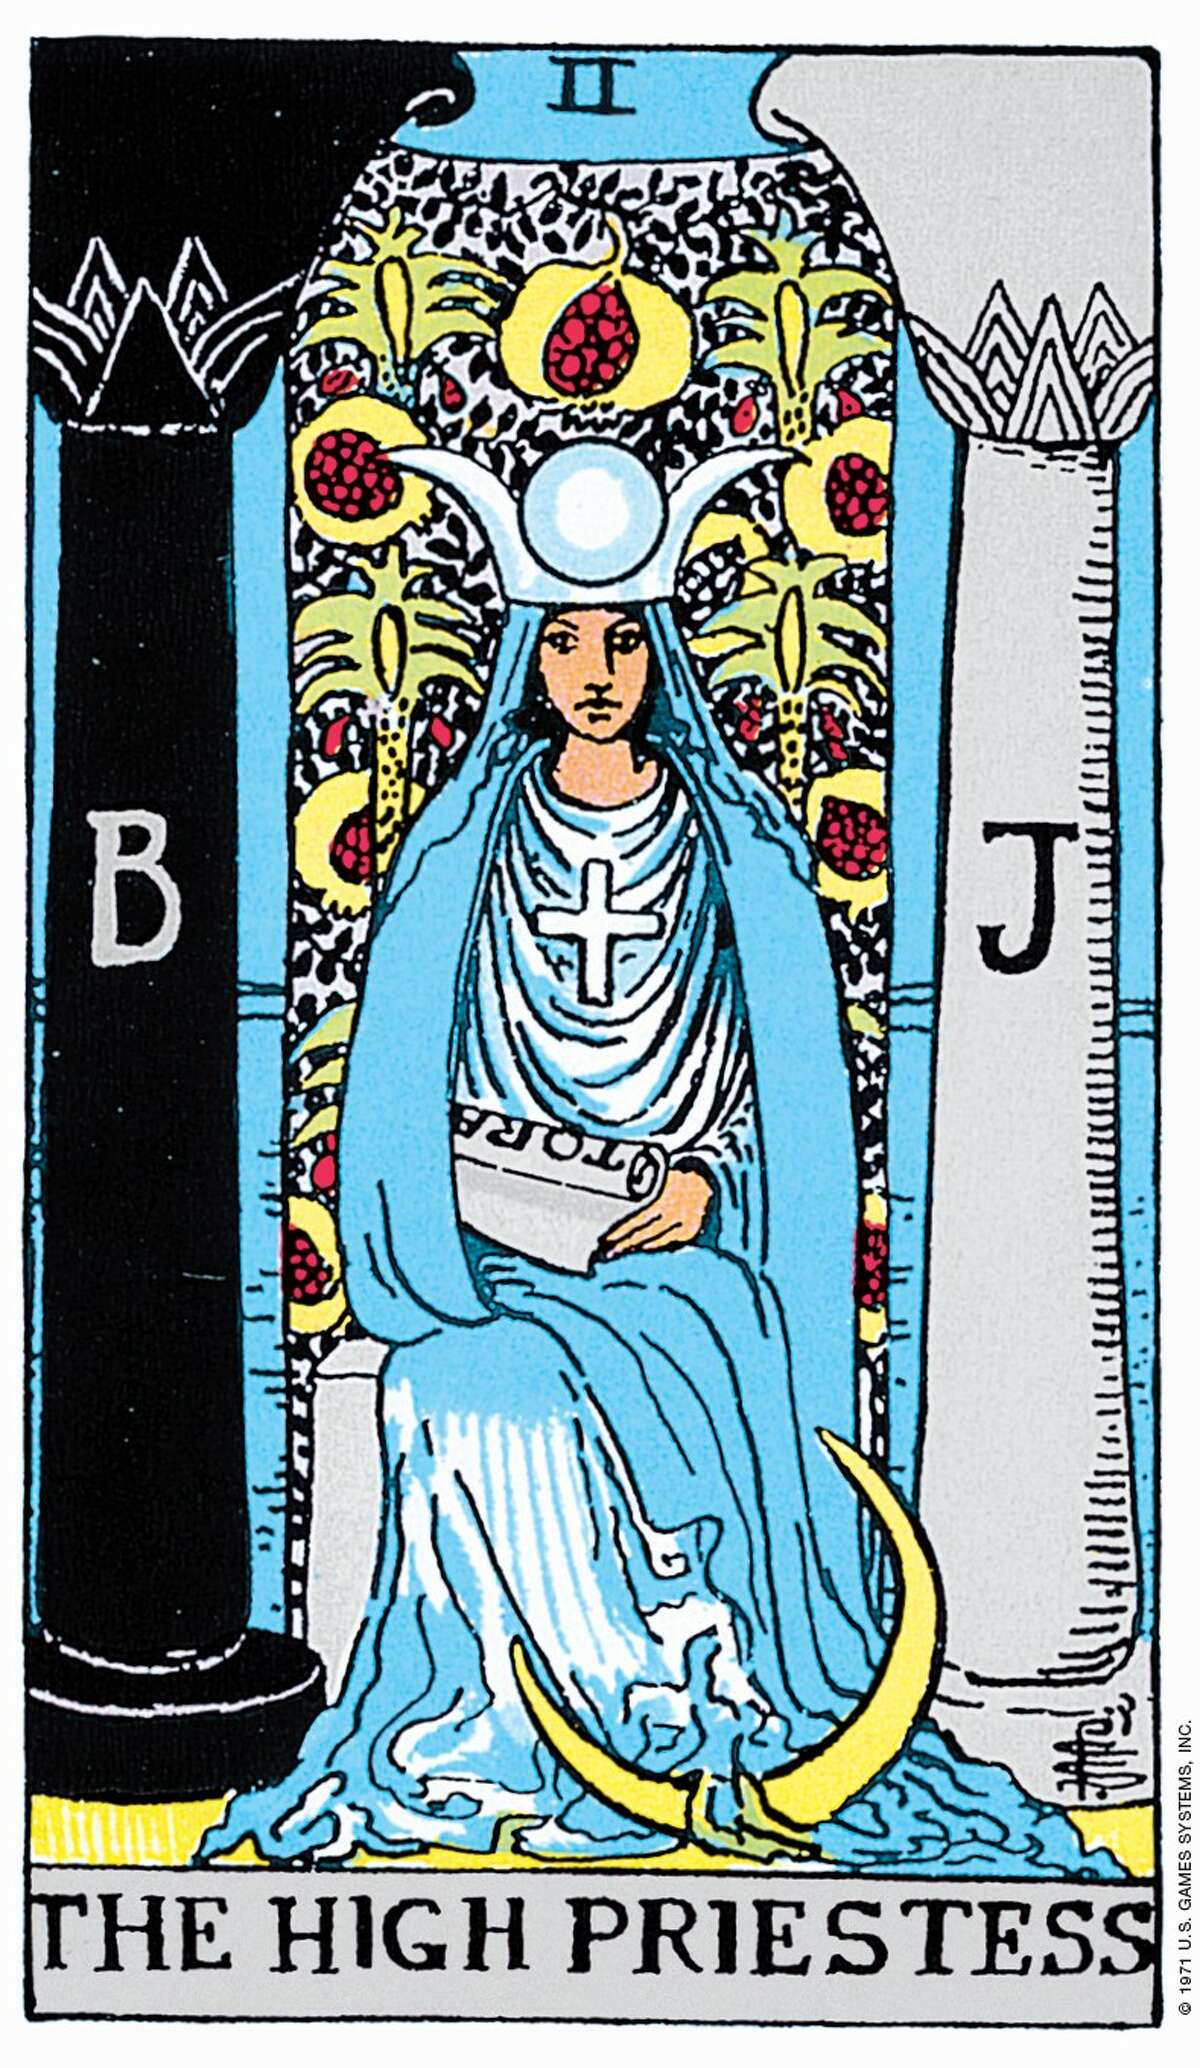 Tarot cards come in a variety of designs, but the Rider-Waite deck more or less set the standard for modern day tarot.  Shown here in The High Priestess of the Rider-Waite Bridge. 